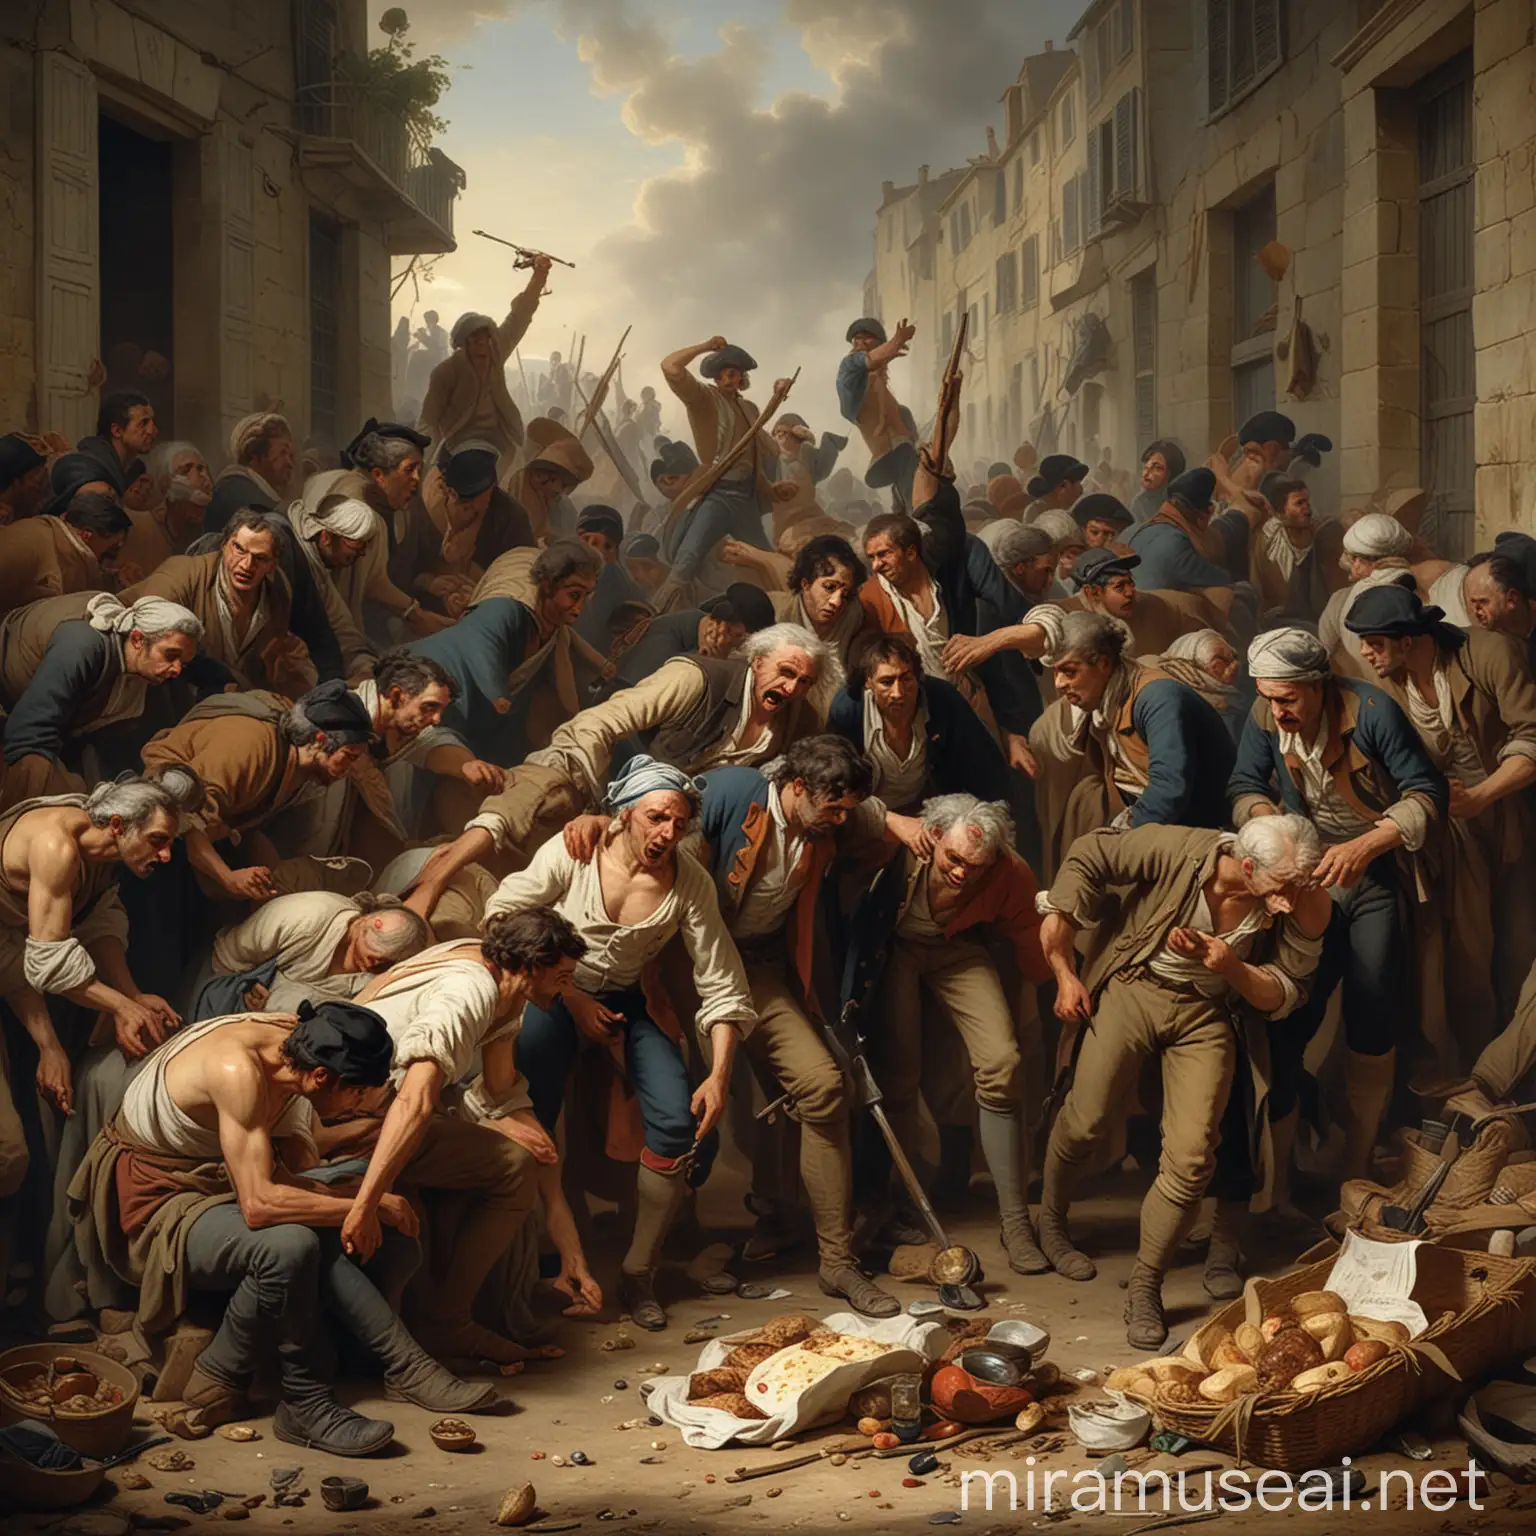 Struggle and Desperation of Starving People During the French Revolution